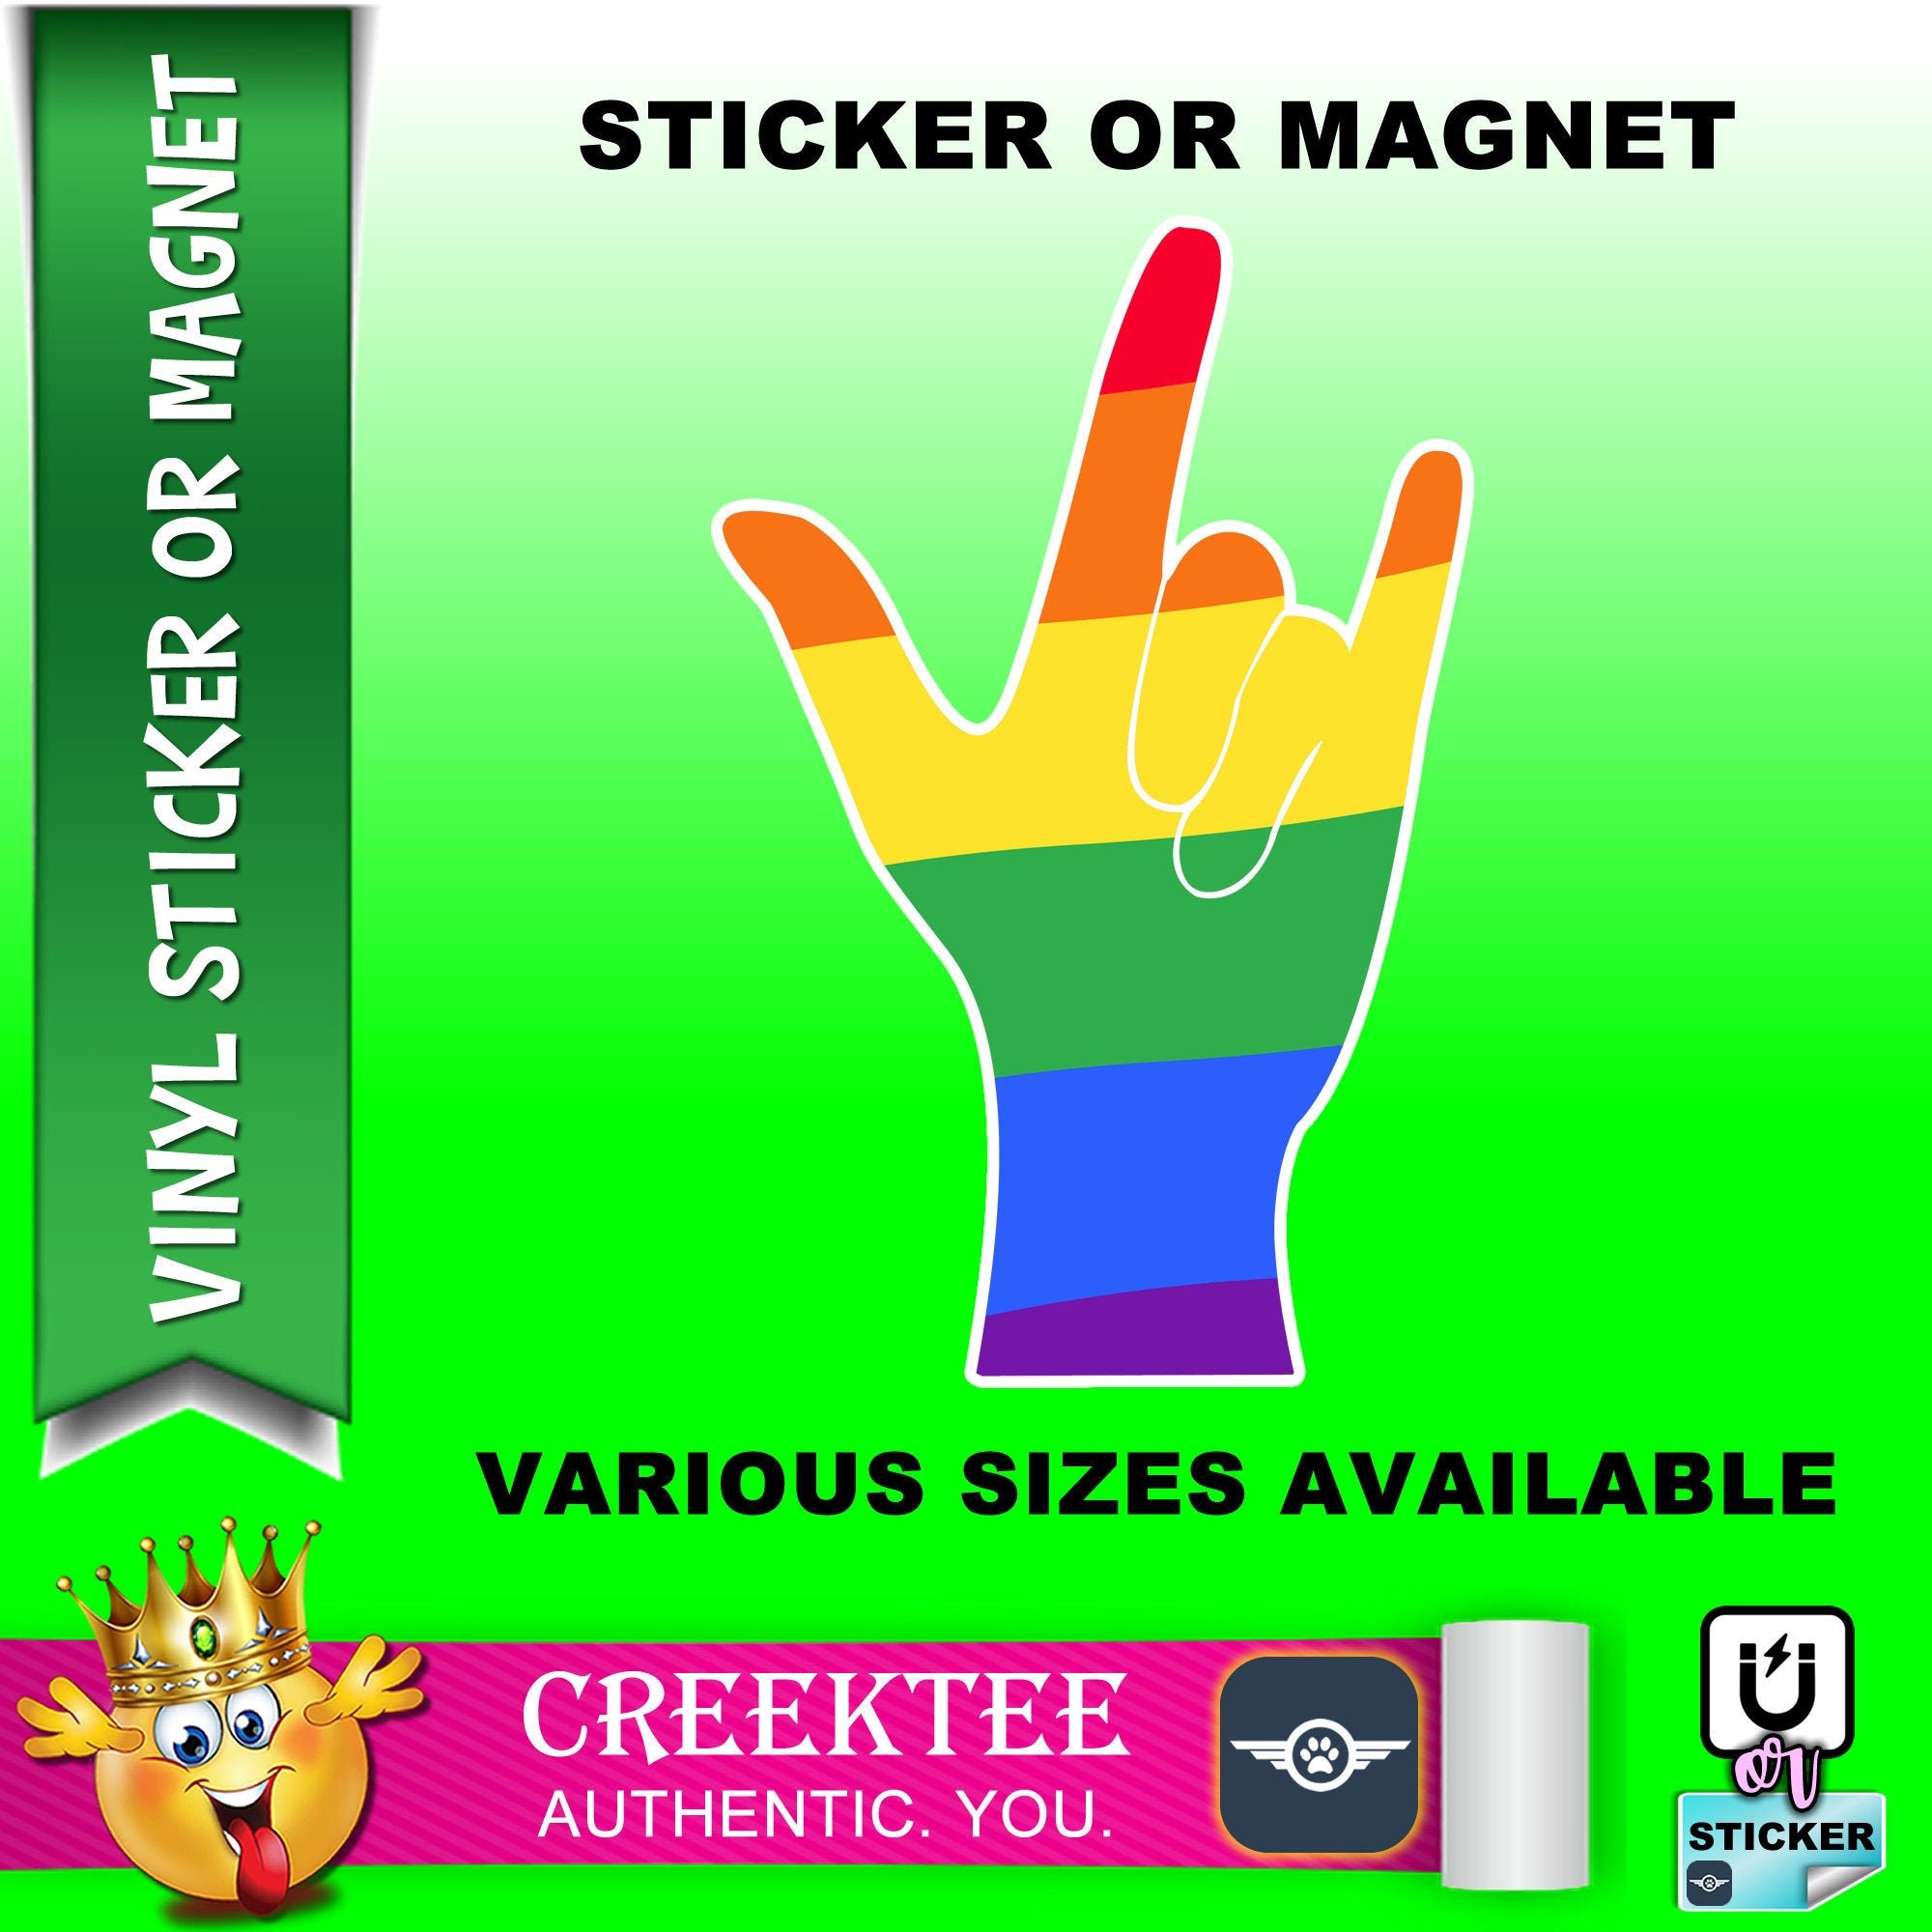 Rainbow Hang Loose Hand Quality Vinyl Sticker or Magnet VARIOUS SIZES with laminate coating